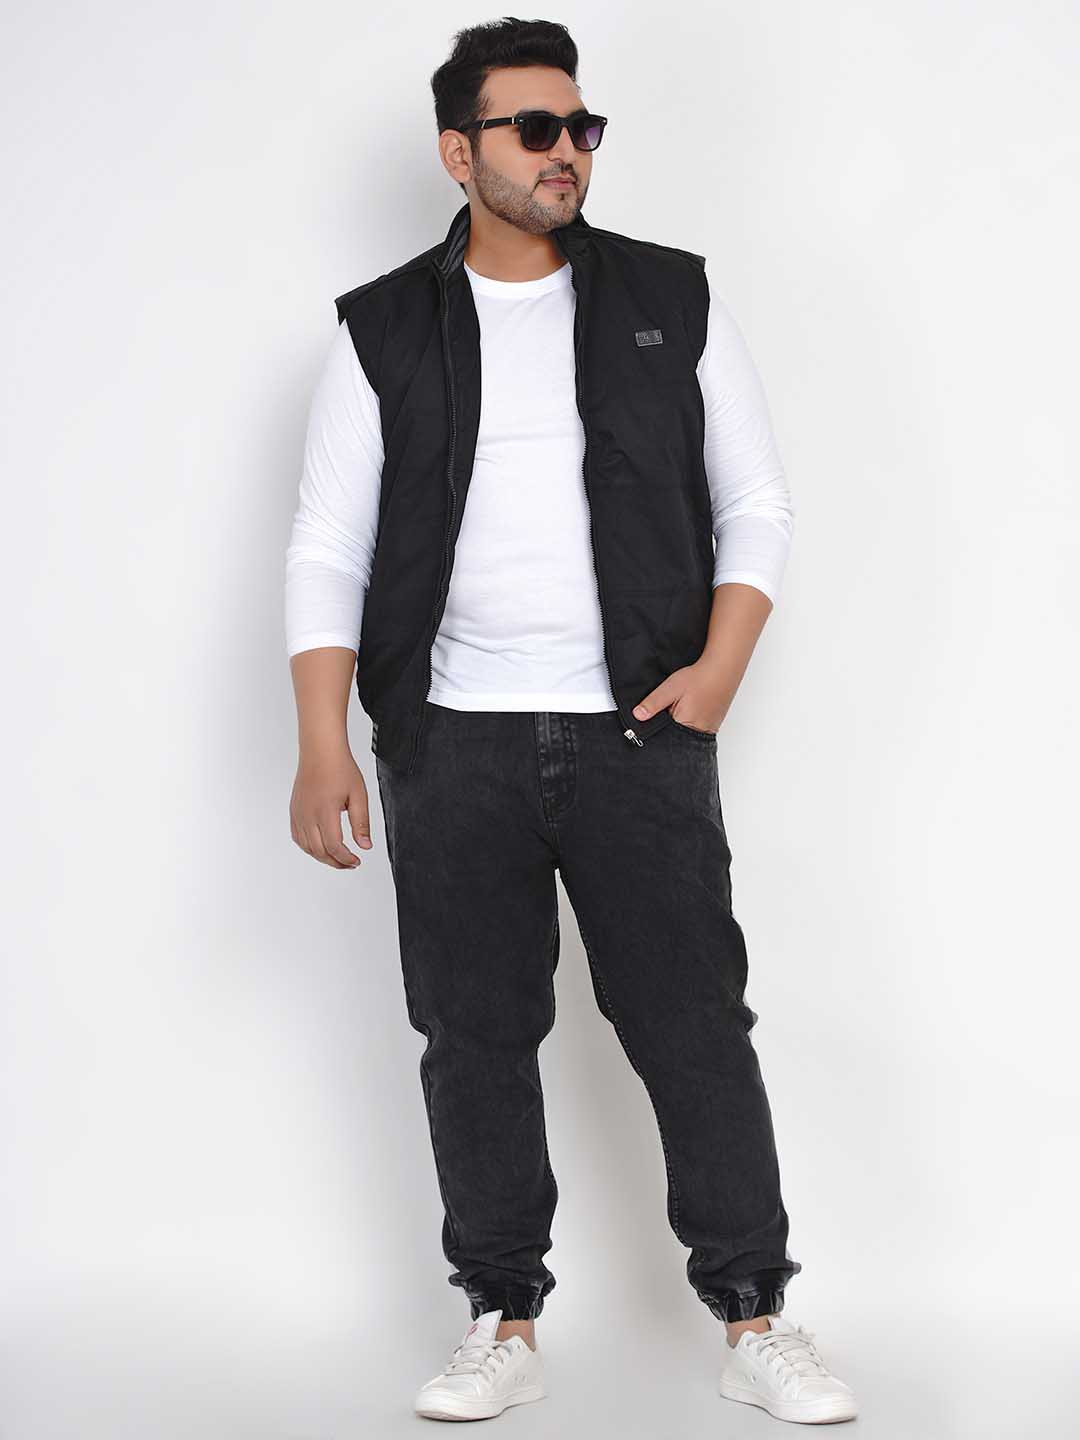 White Black Jeans Jackets - Buy White Black Jeans Jackets online in India